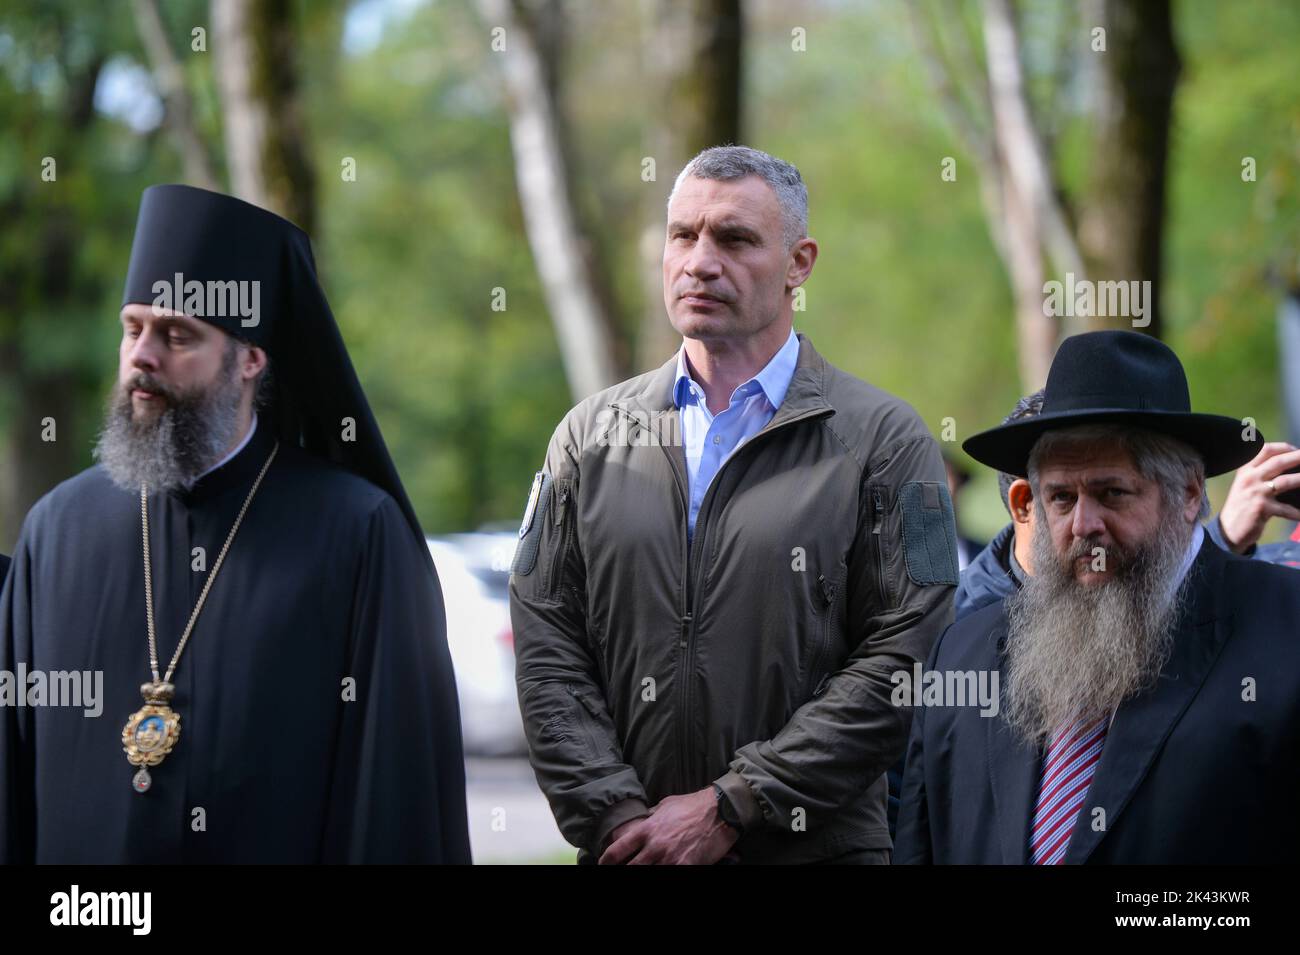 KYIV, UKRAINE - SEPTEMBER 29, 2022 - Chief Rabbi of Ukraine Moshe Reuven Asman and Kyiv Mayor Vitali Klitschko (R to L) attend a joint interreligious prayer dedicated to the Day of Remembrance of the Babyn Yar Victims at the symbolic Place for Reflection synagogue on the territory of the Babyn Yar National Historical and Memorial Reserve, Kyiv, capital of Ukraine. Stock Photo